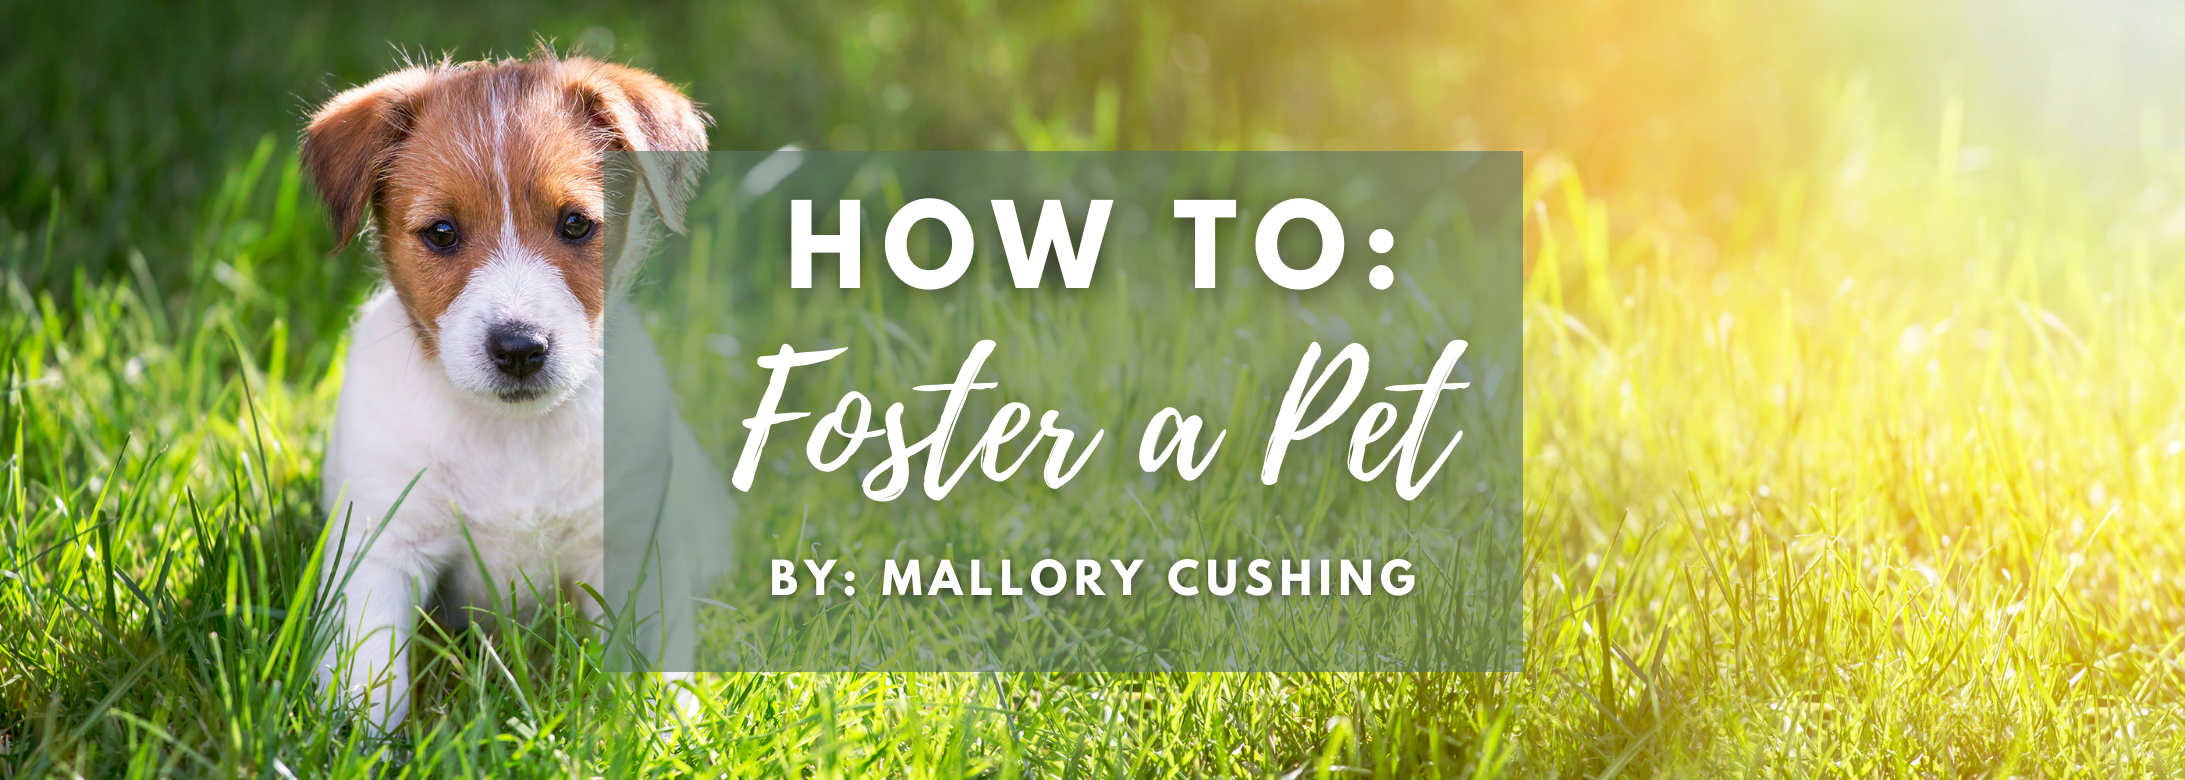 How to Foster a Pet blog cover